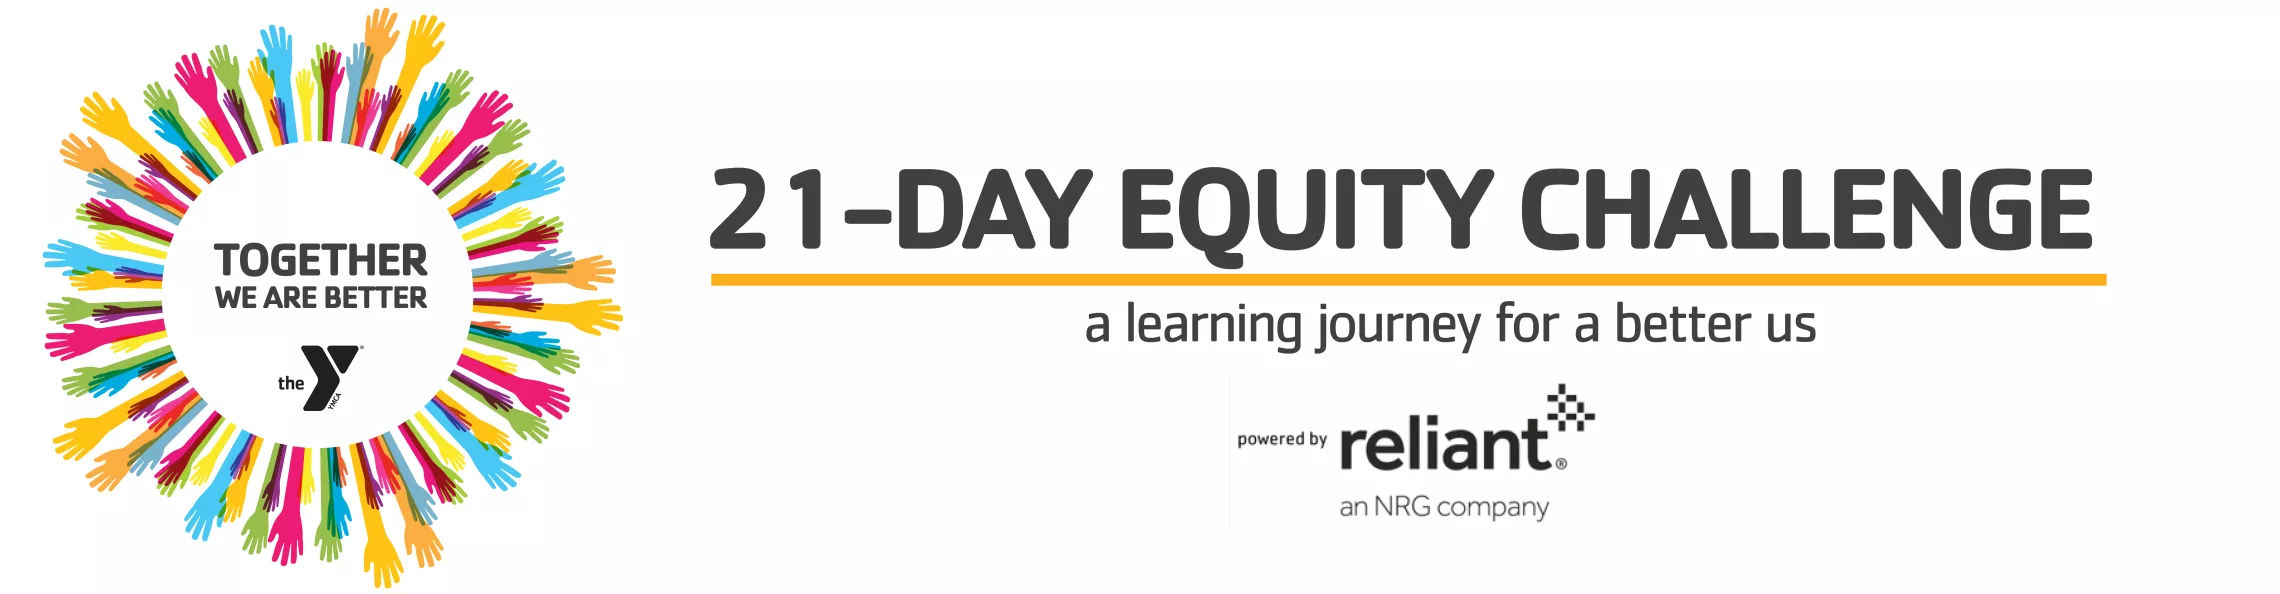 YMCA 21 Day Equity Challenge